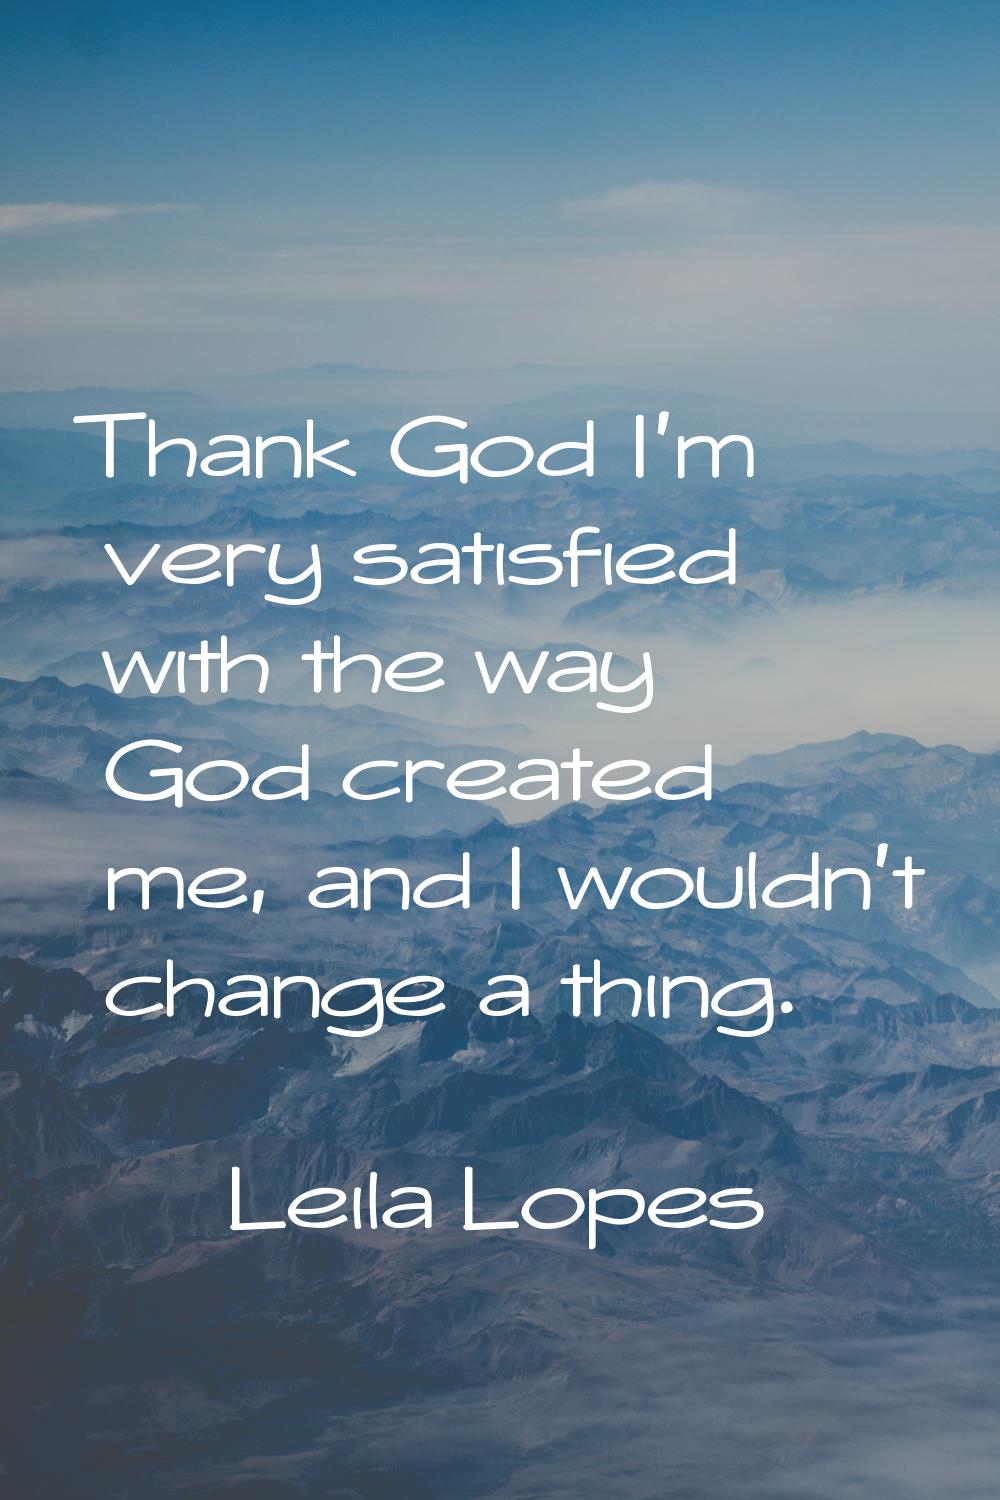 Thank God I'm very satisfied with the way God created me, and I wouldn't change a thing.